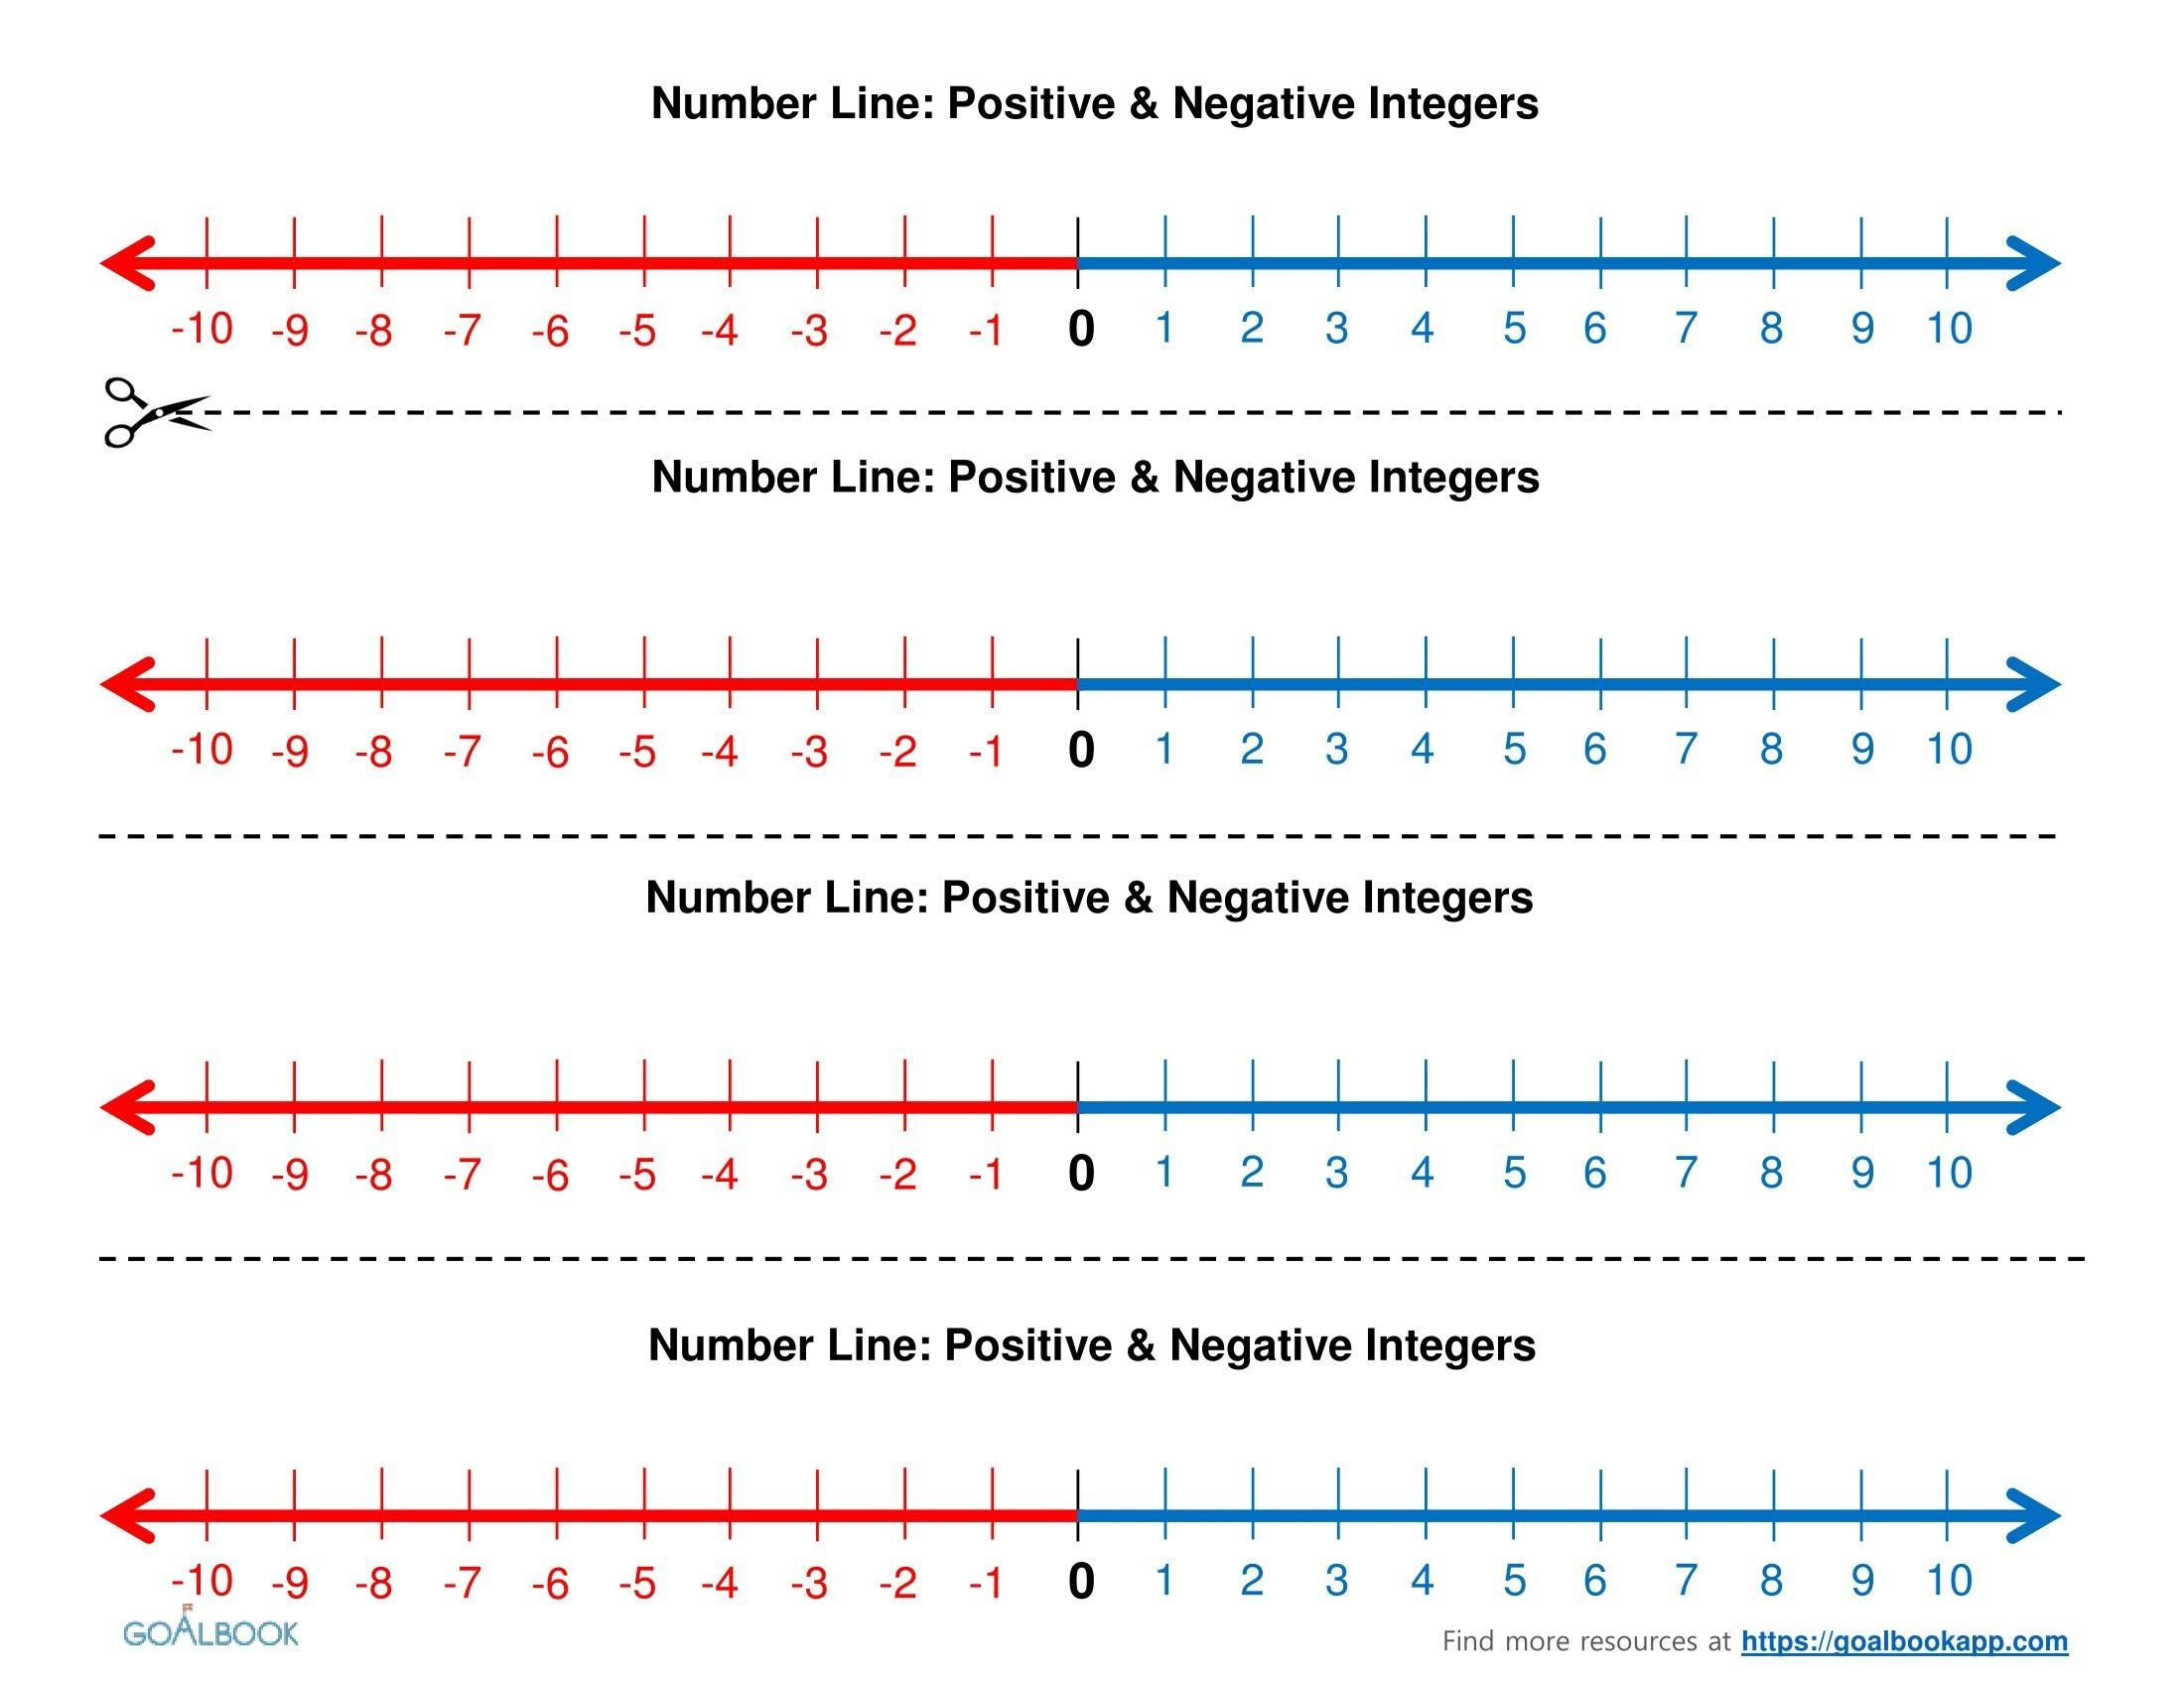 Image Result For Number Line With Positive And Negative 